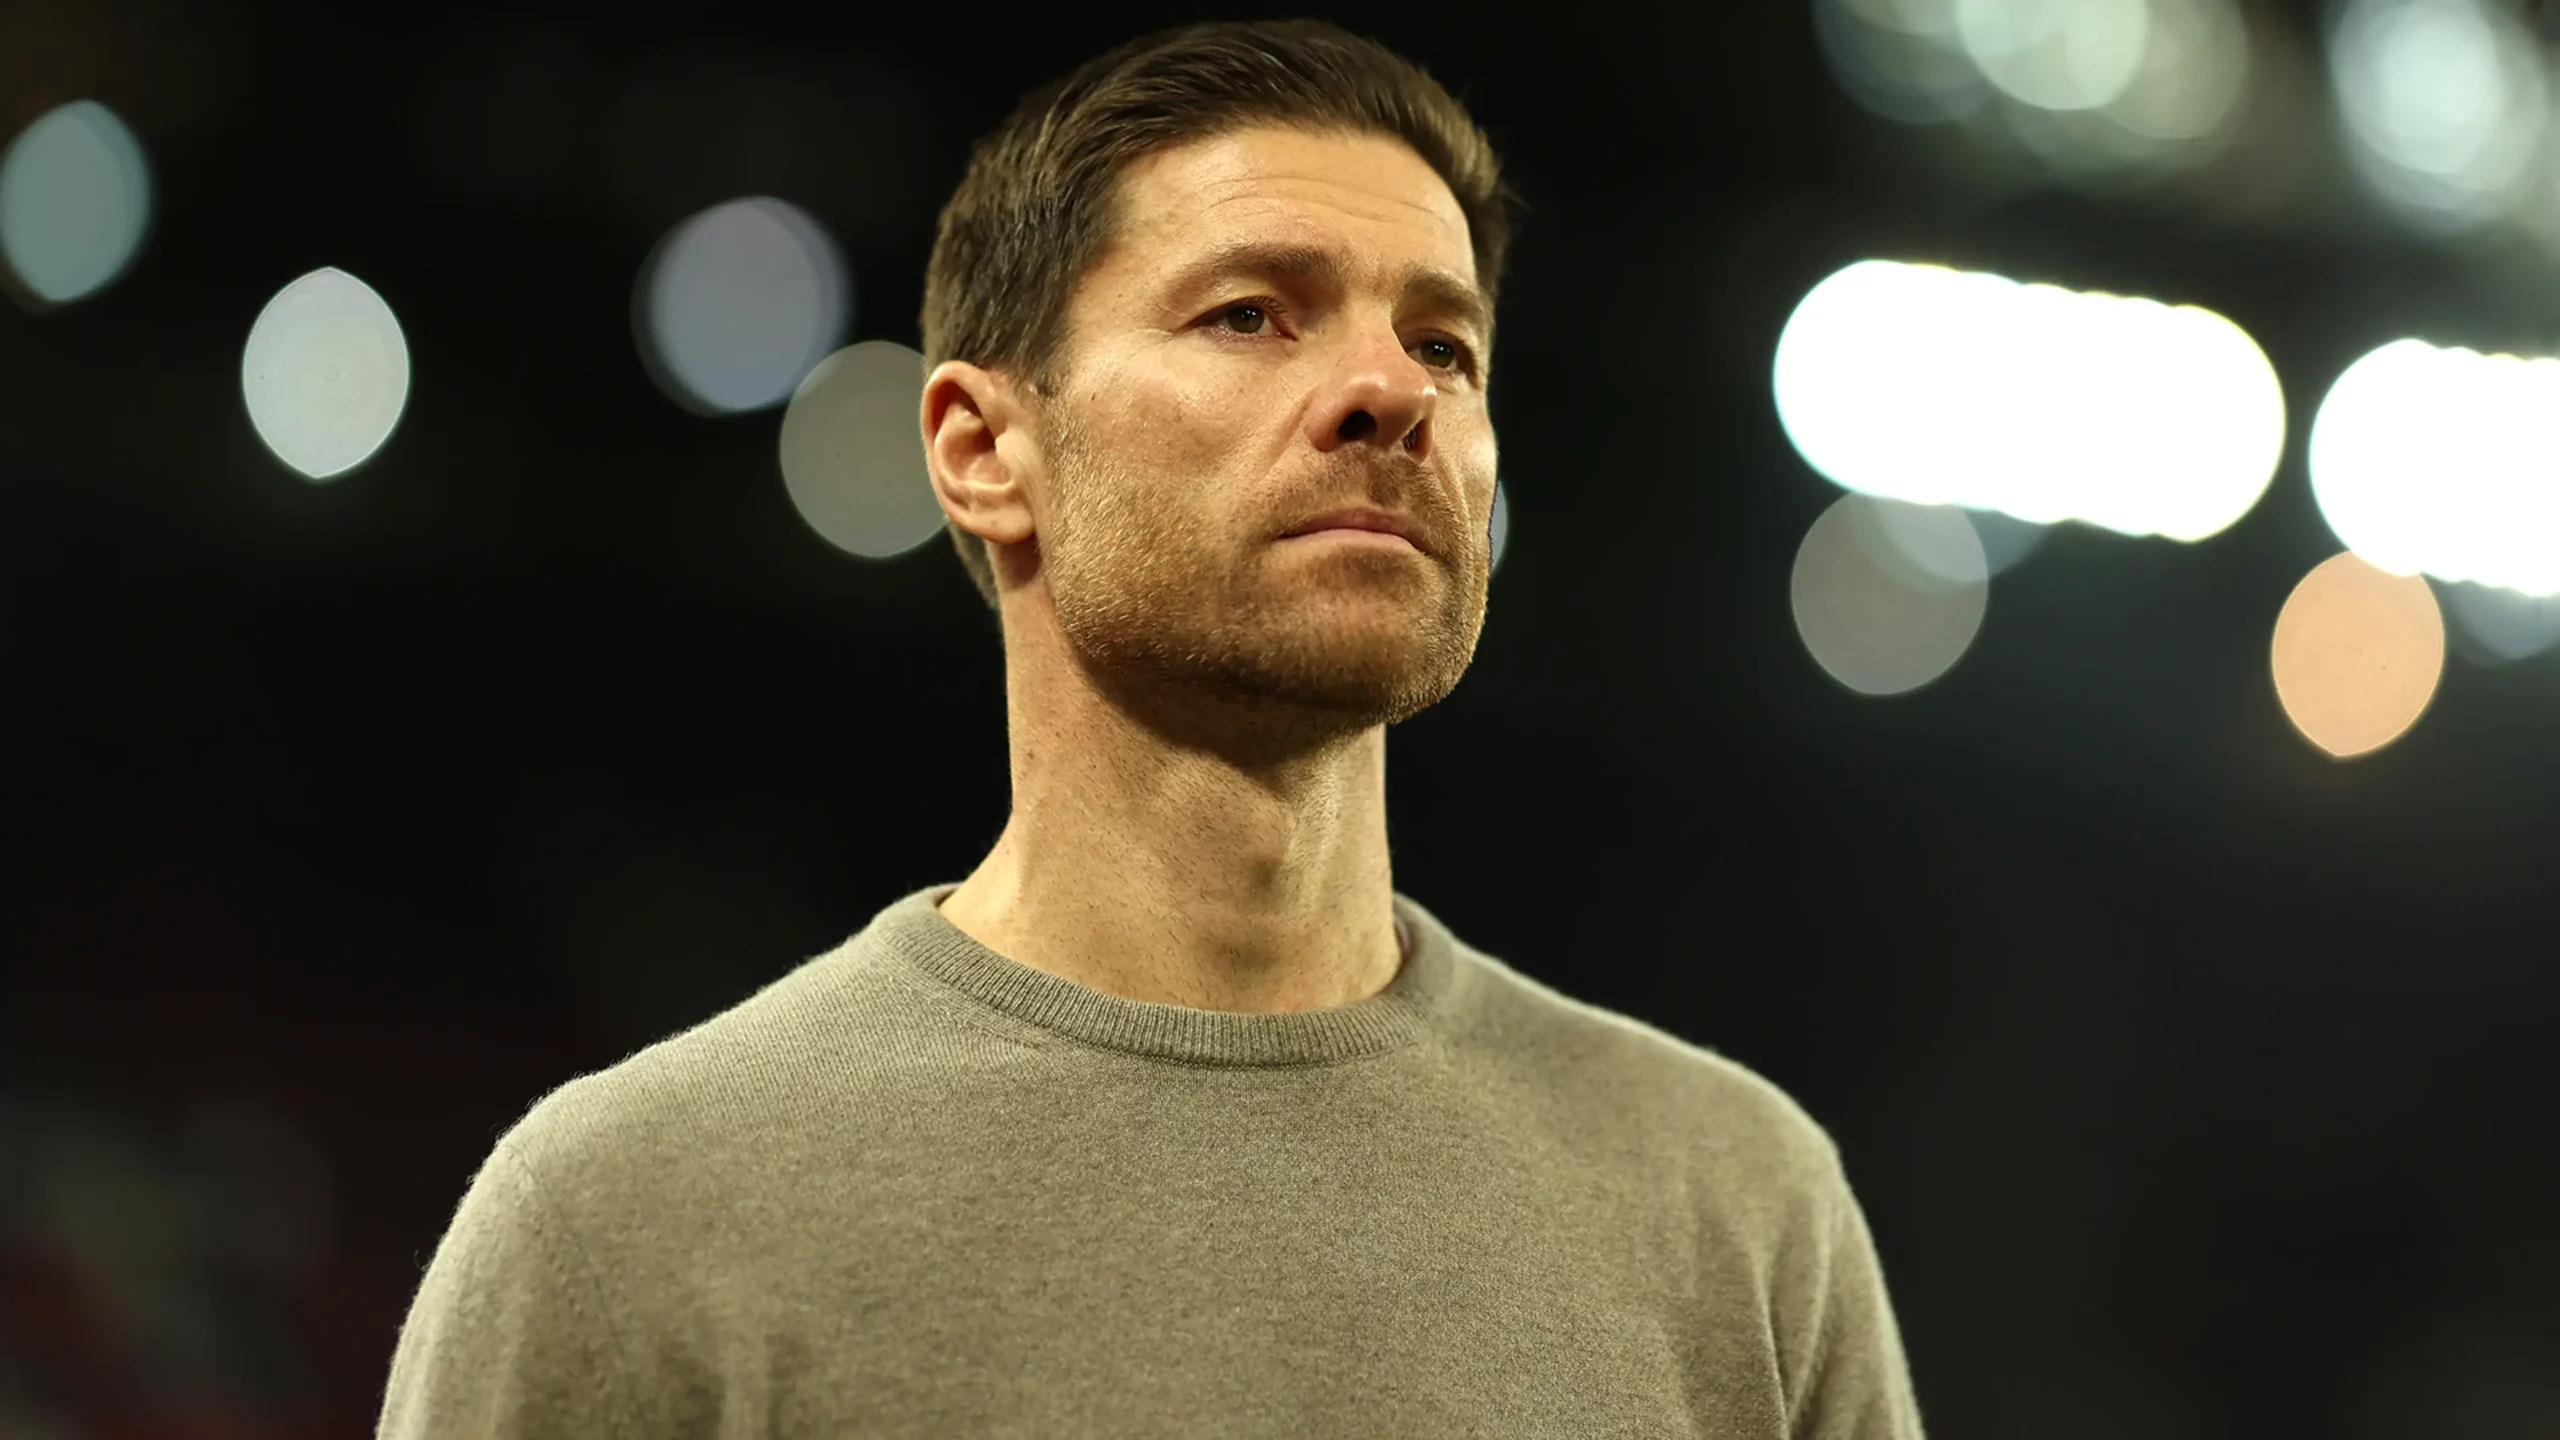 I will not miss them – Xabi Alonso on his African players who will be leaving for AFCON